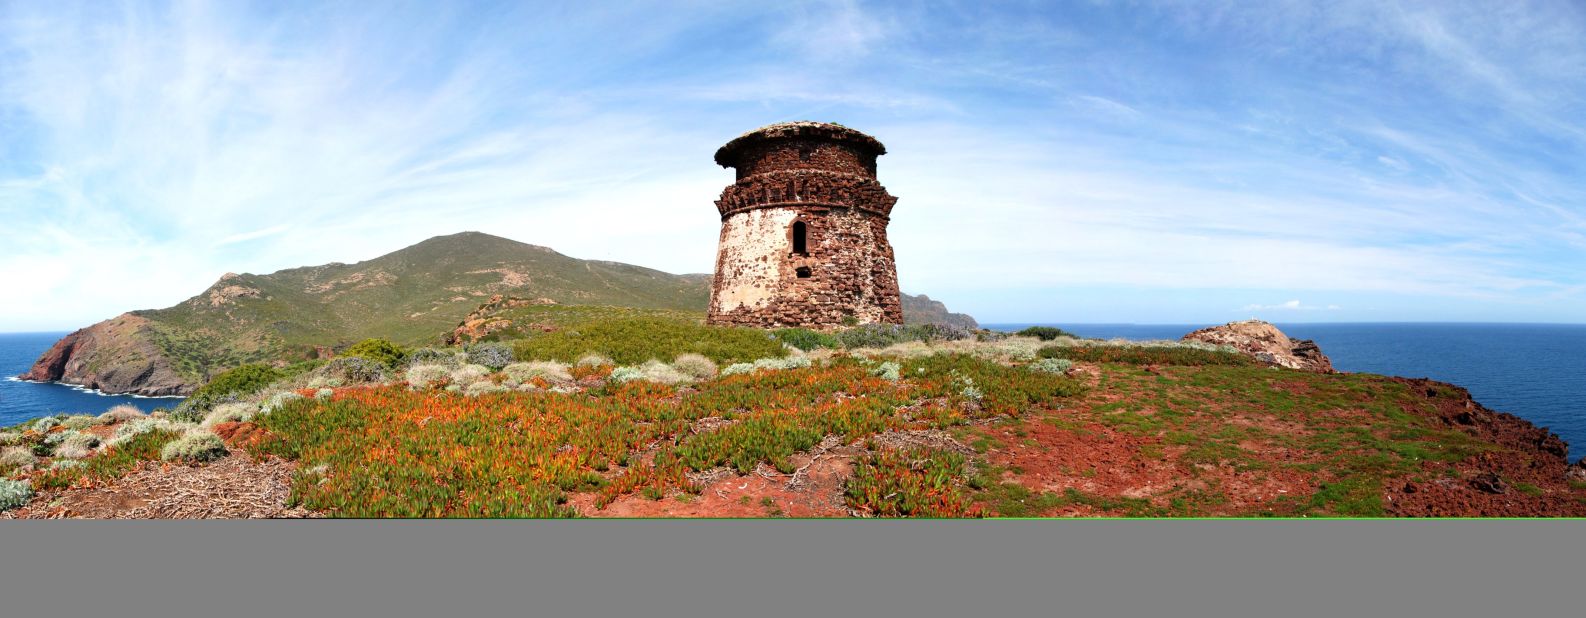 The Zenobito Tower on Capraia overlooks Ceppo Bay, one of the island's best bathing spots.